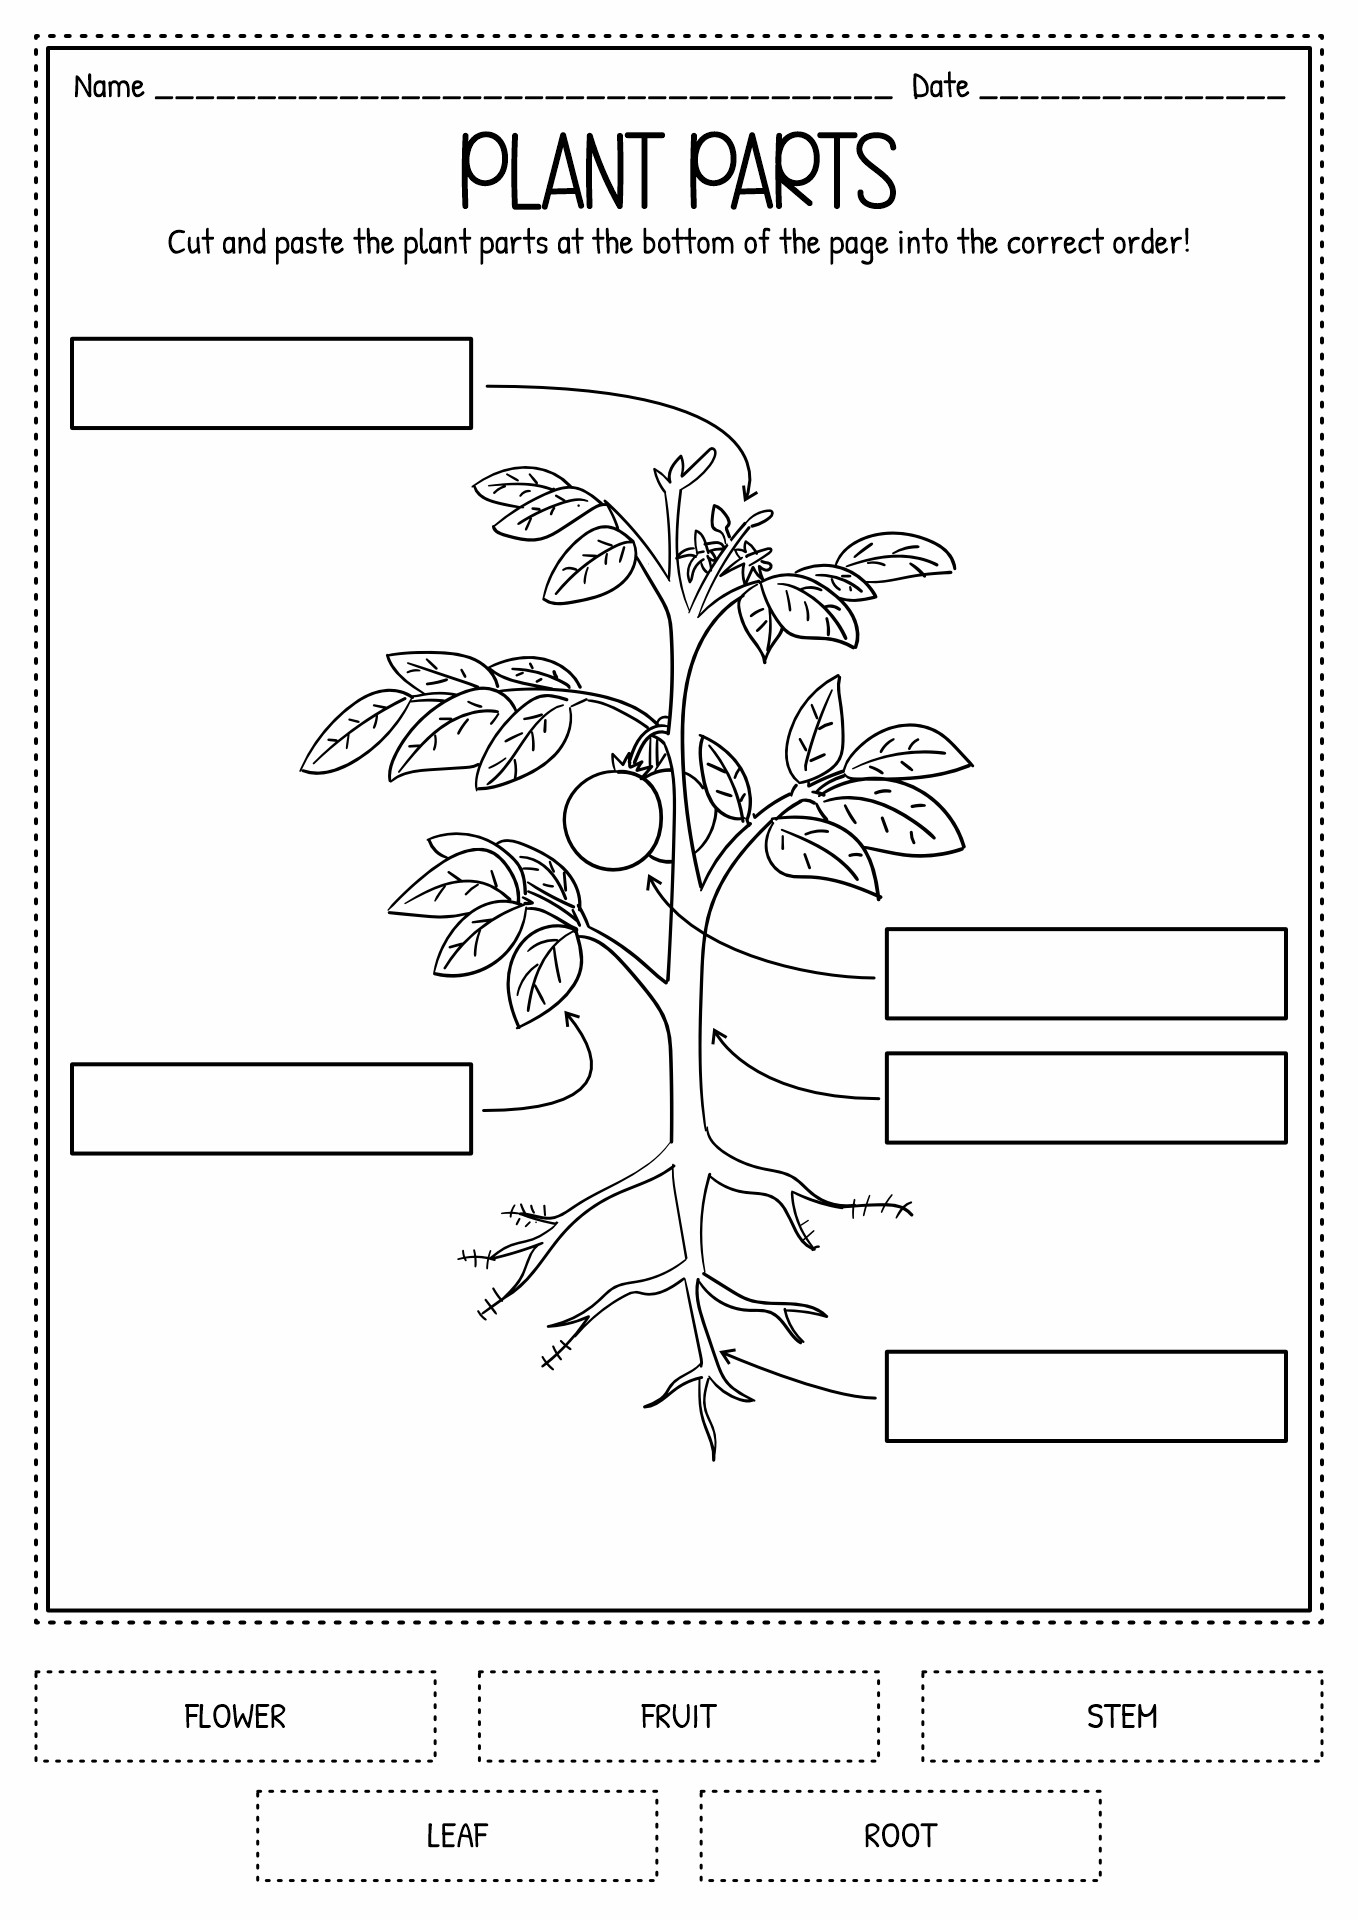 Cut and Paste Plant Parts Worksheet Image